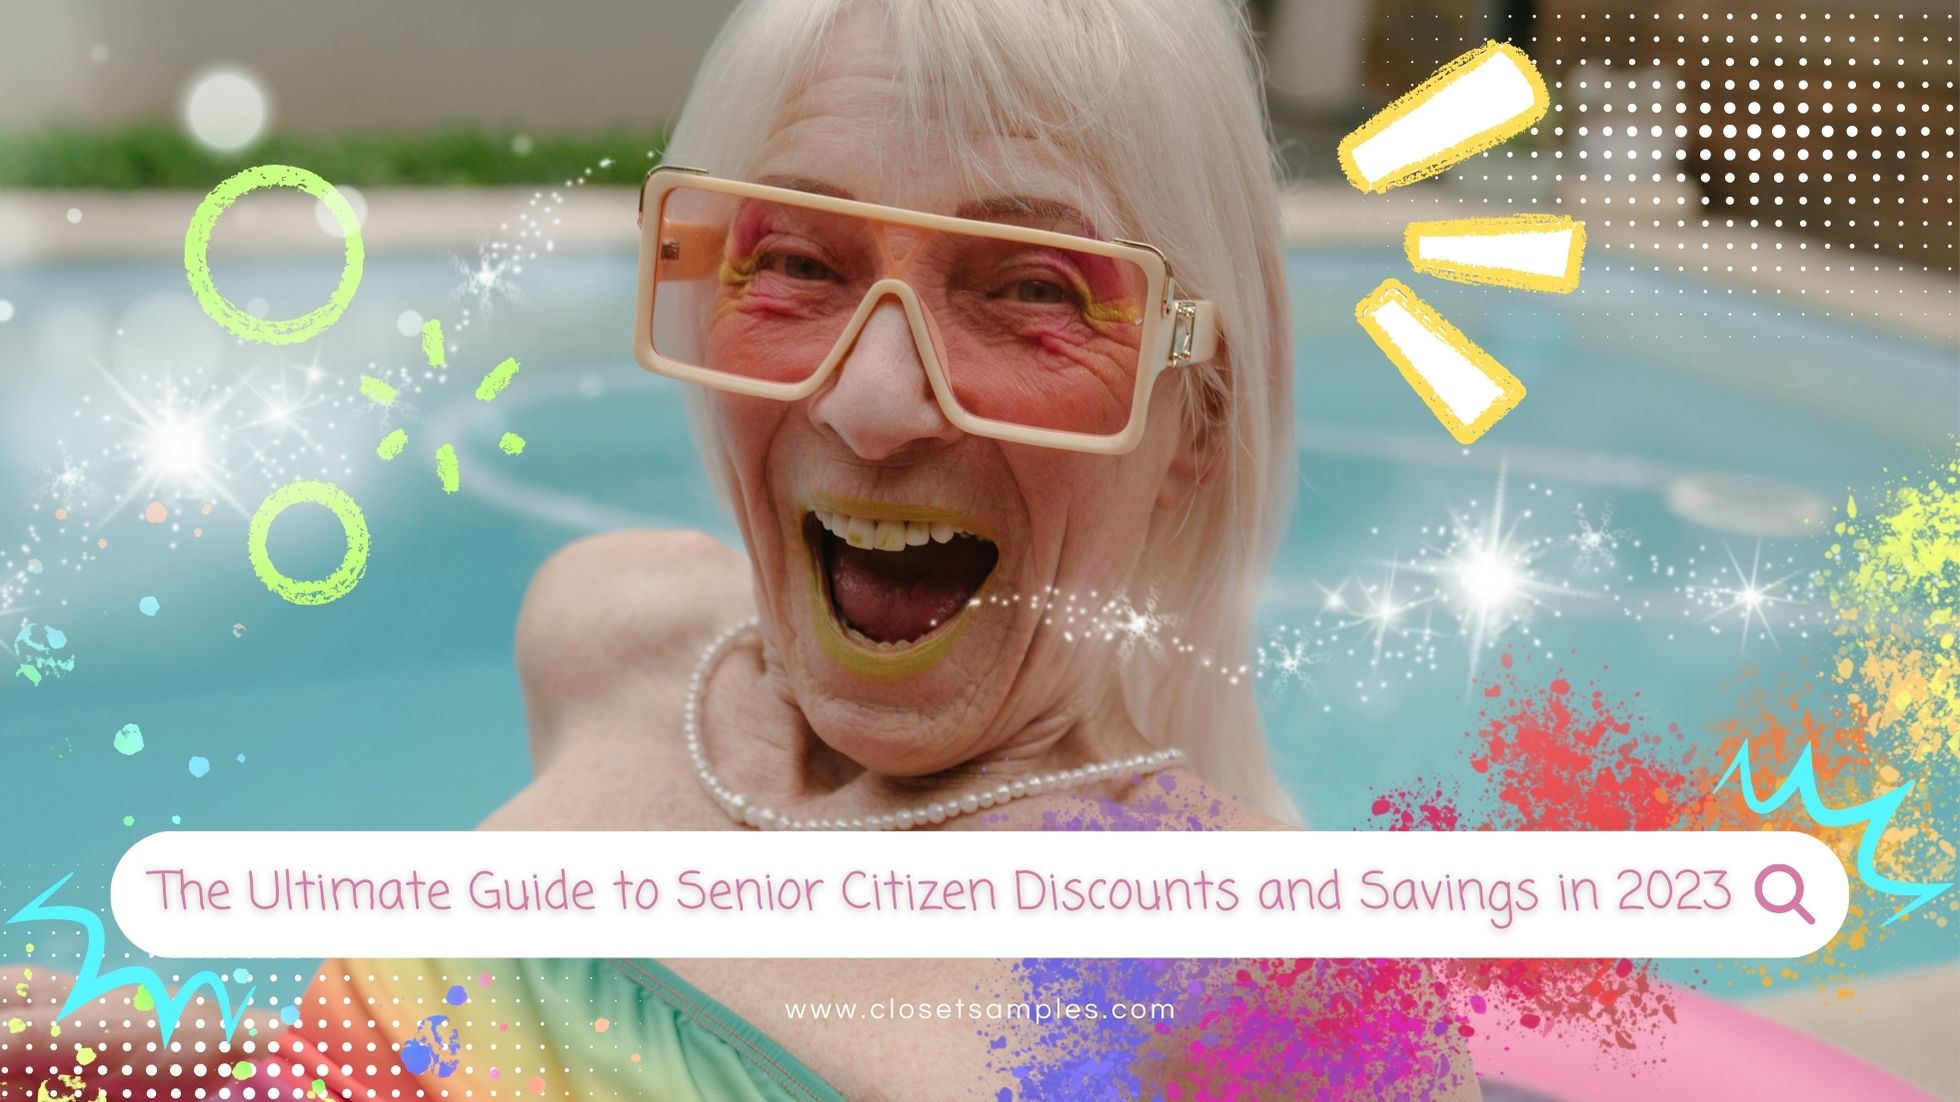 The Ultimate Guide to Senior Citizen Discounts and Savings in 2023